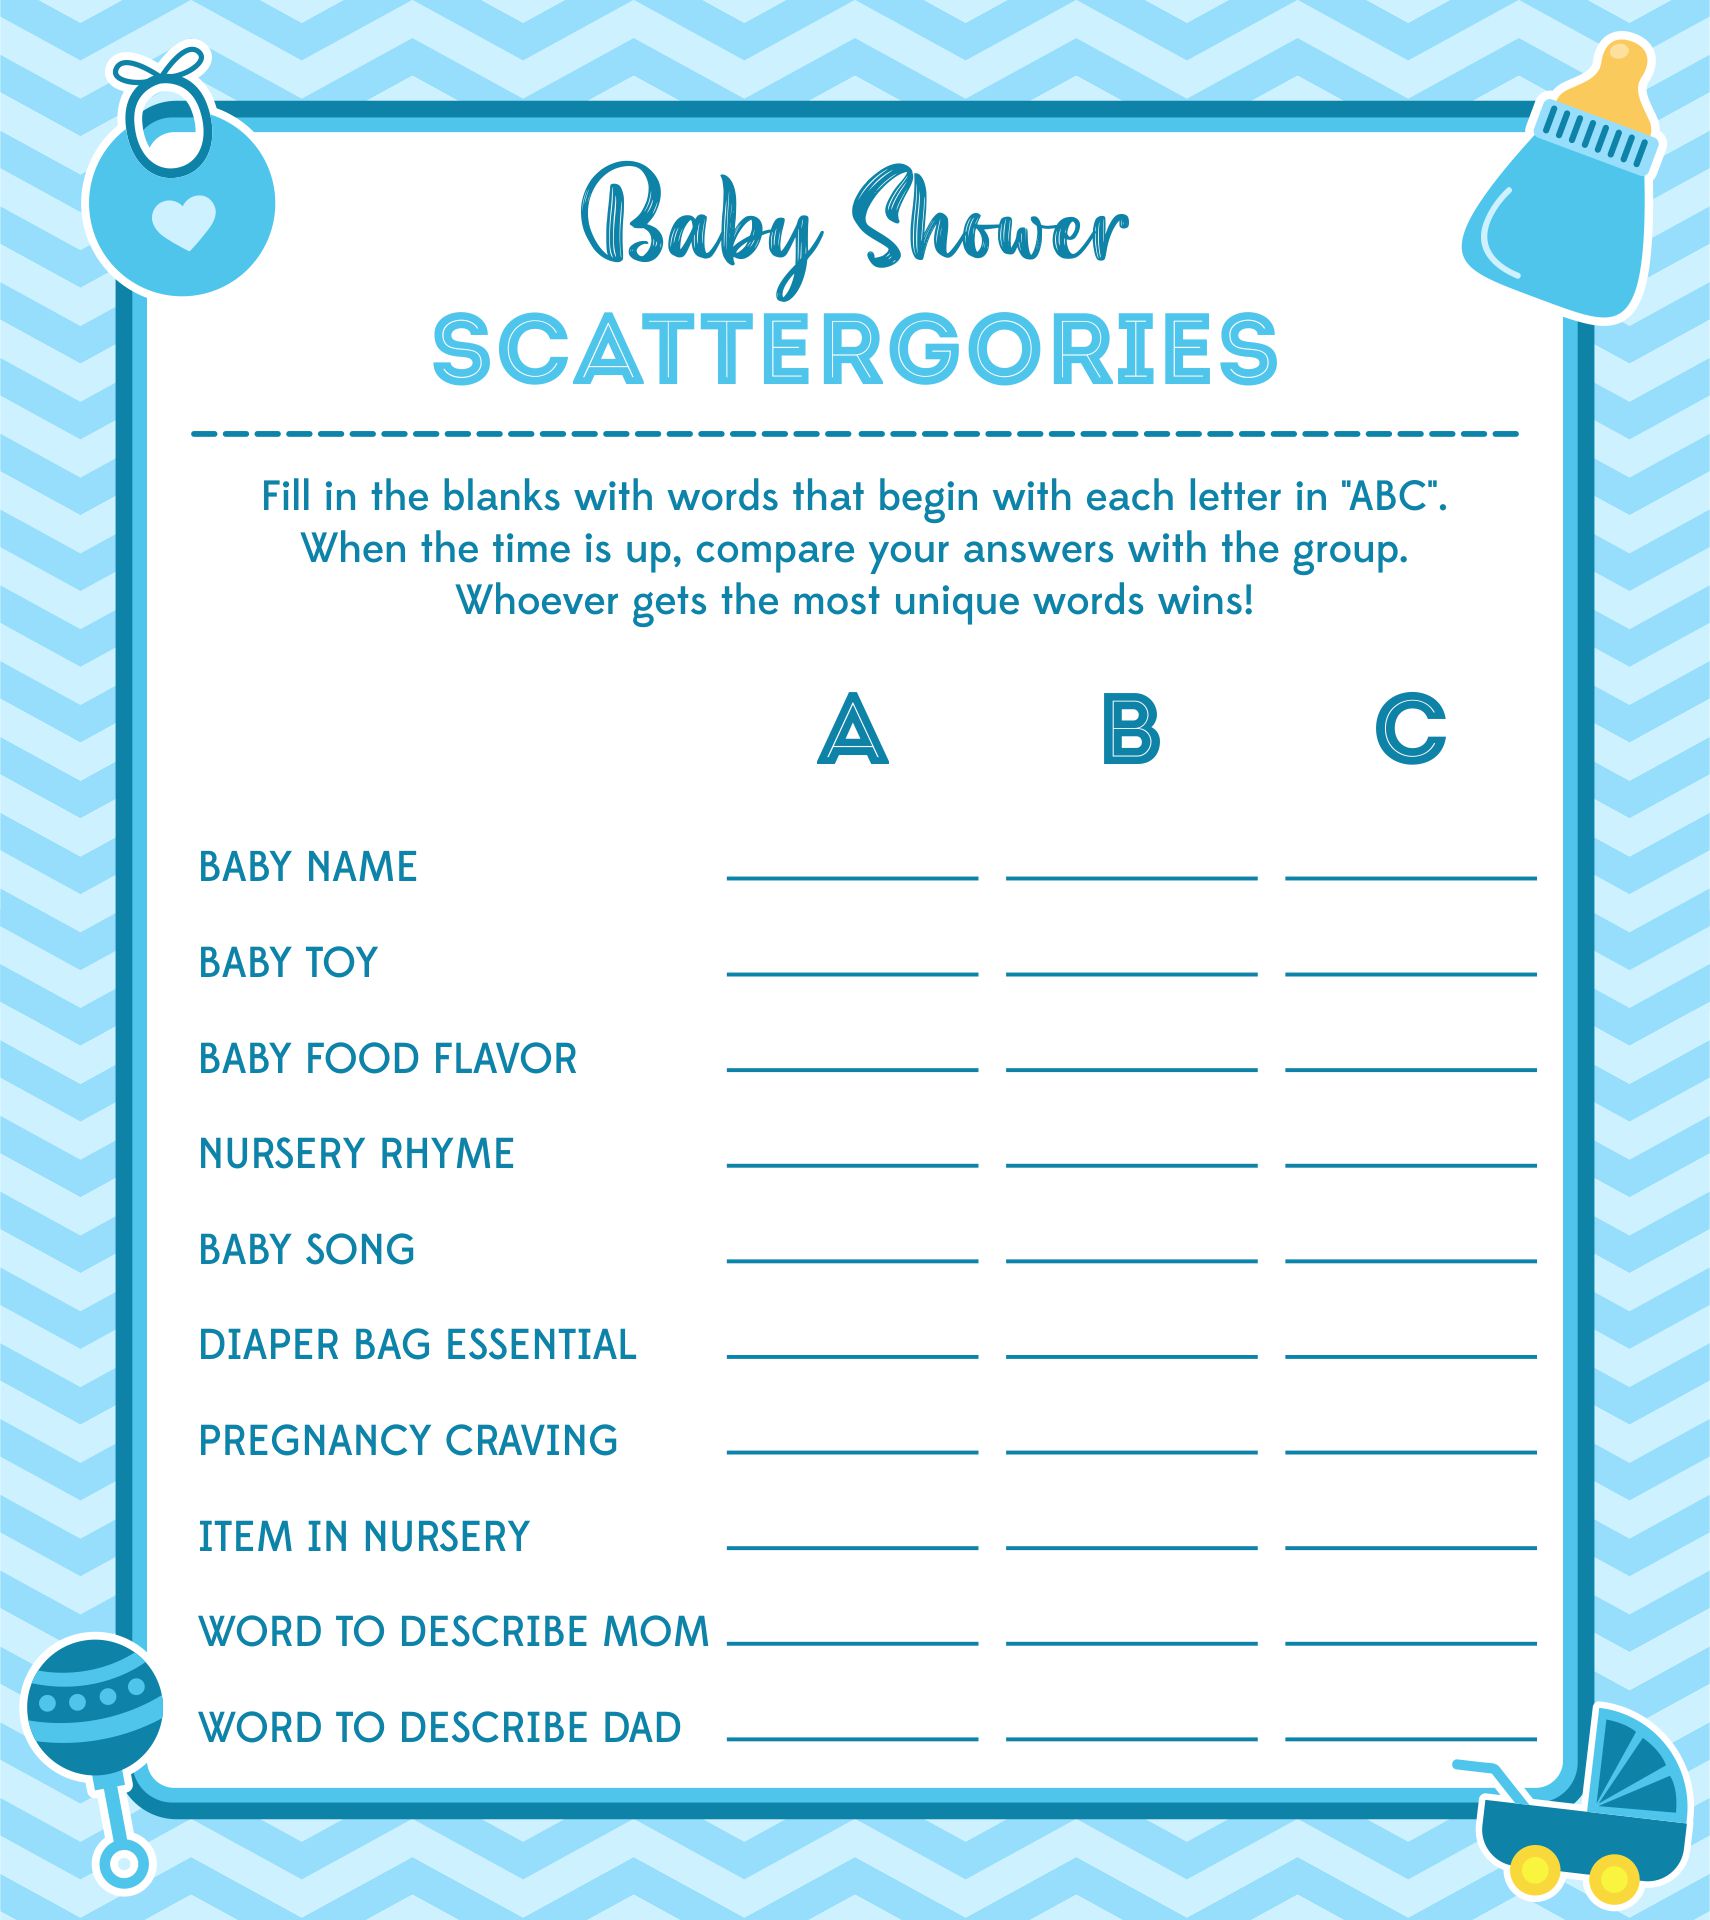 6-best-images-of-baby-shower-scattergories-printable-free-baby